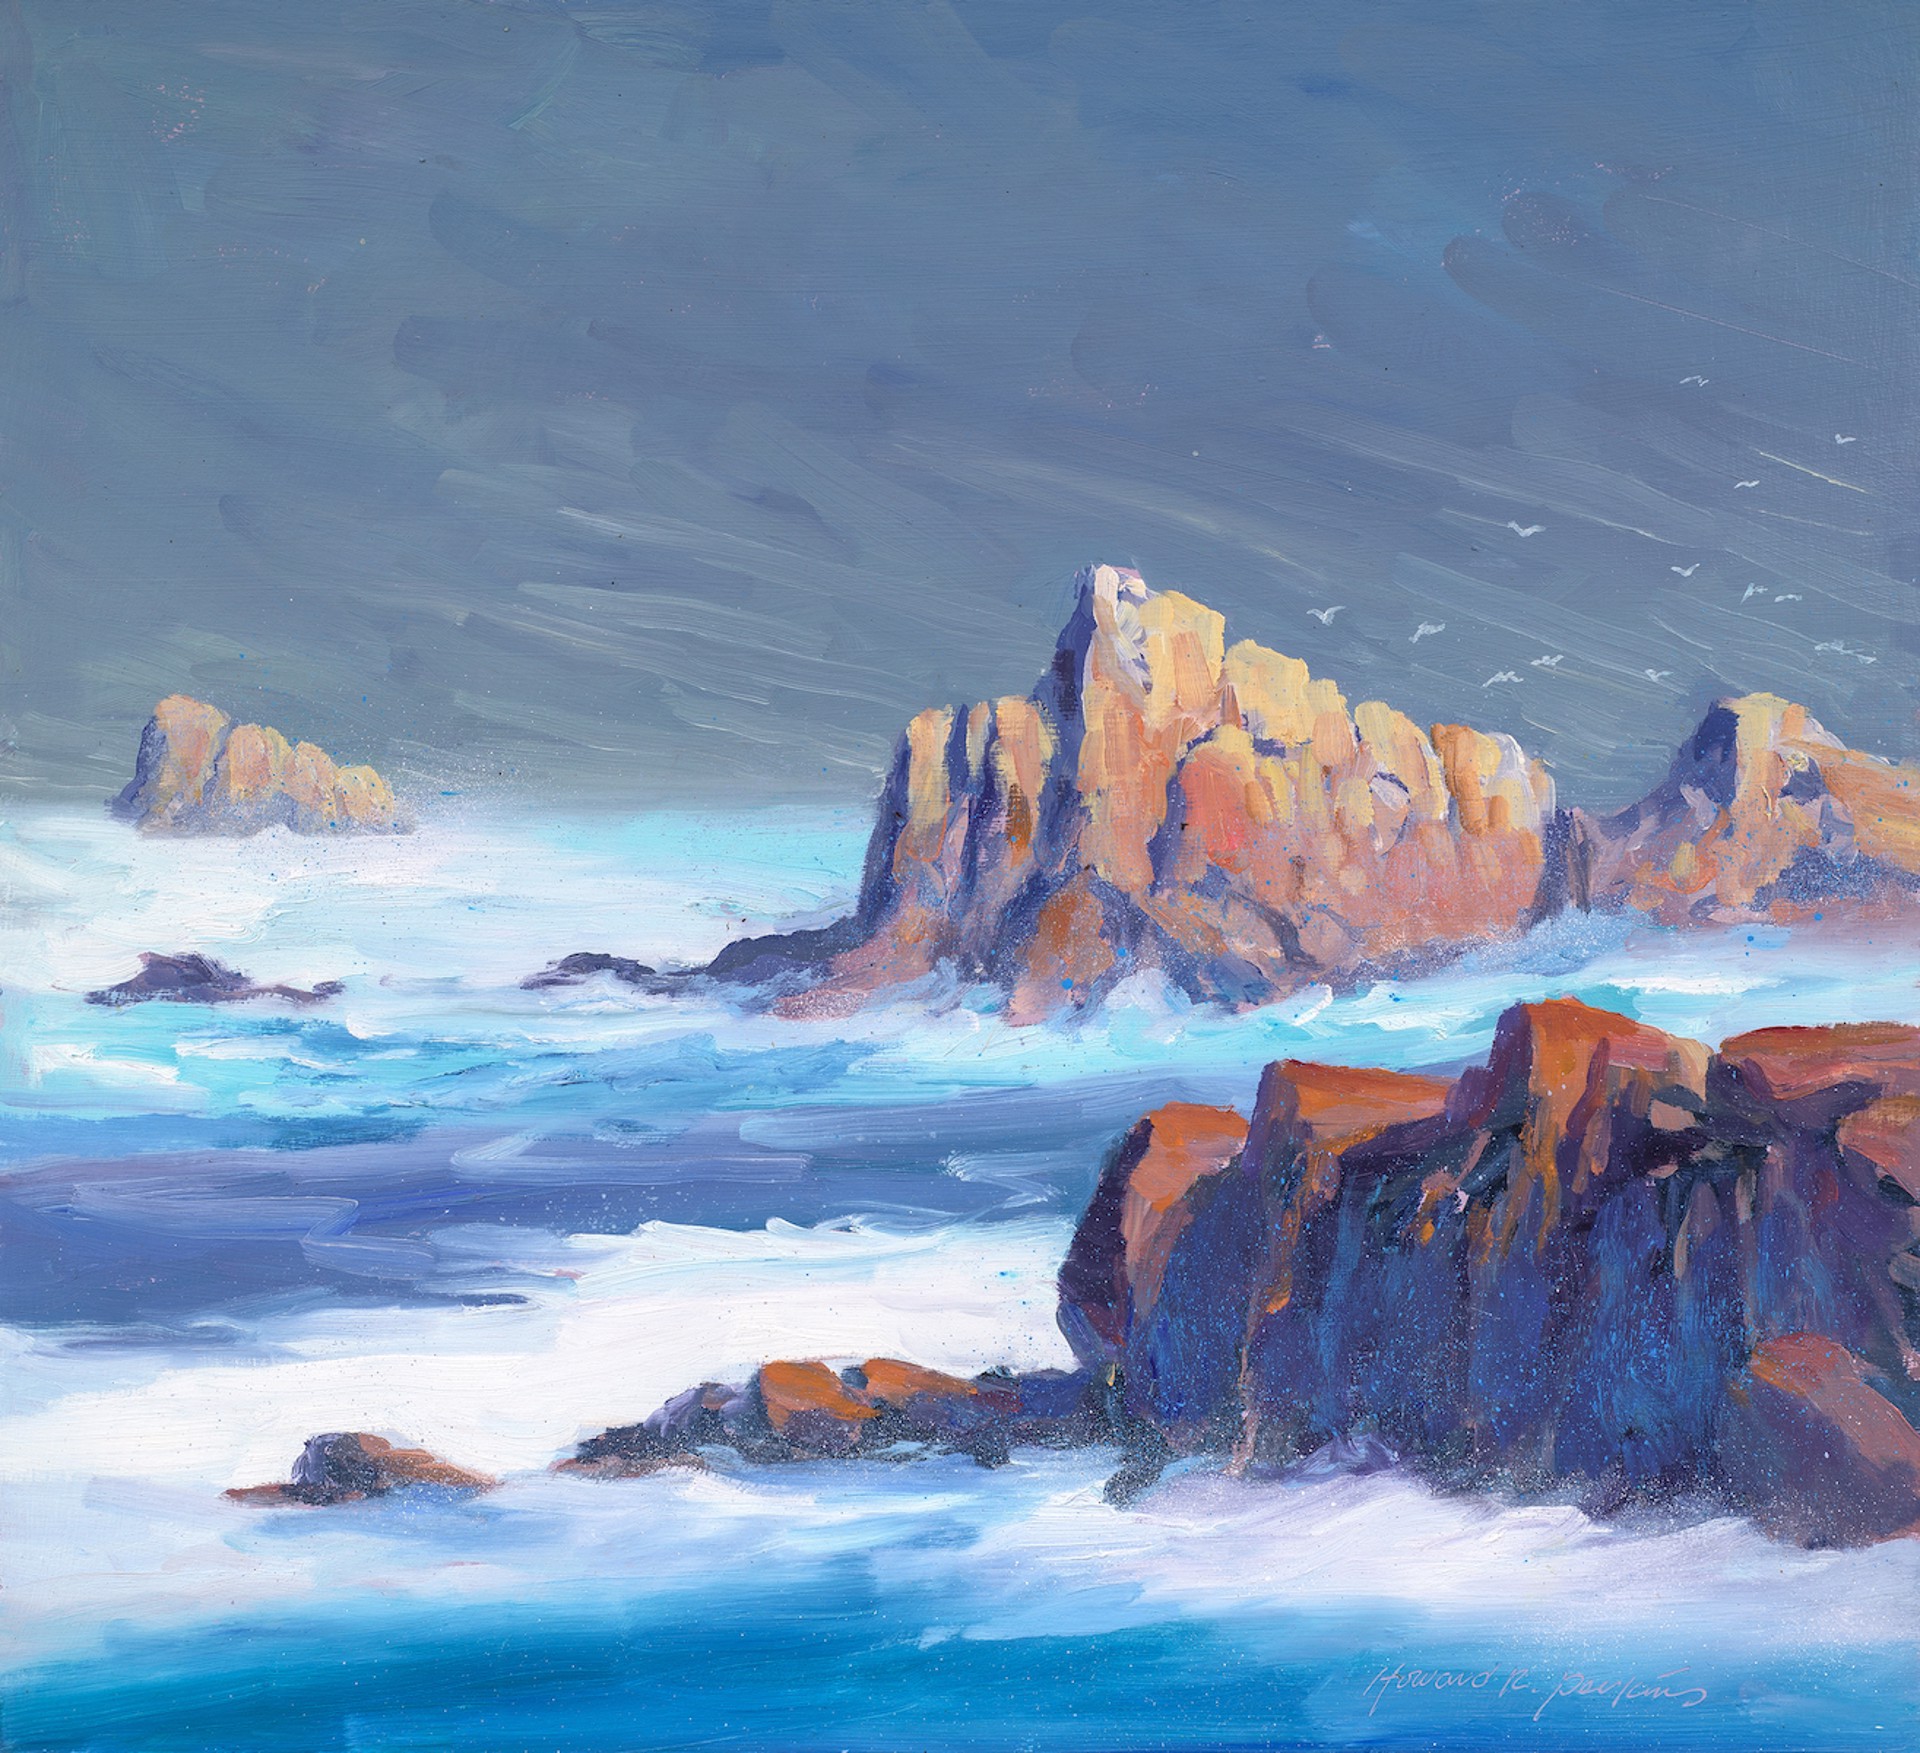 Storm Watch Pt. Pinos Monterey Bay by Howard R. Perkins